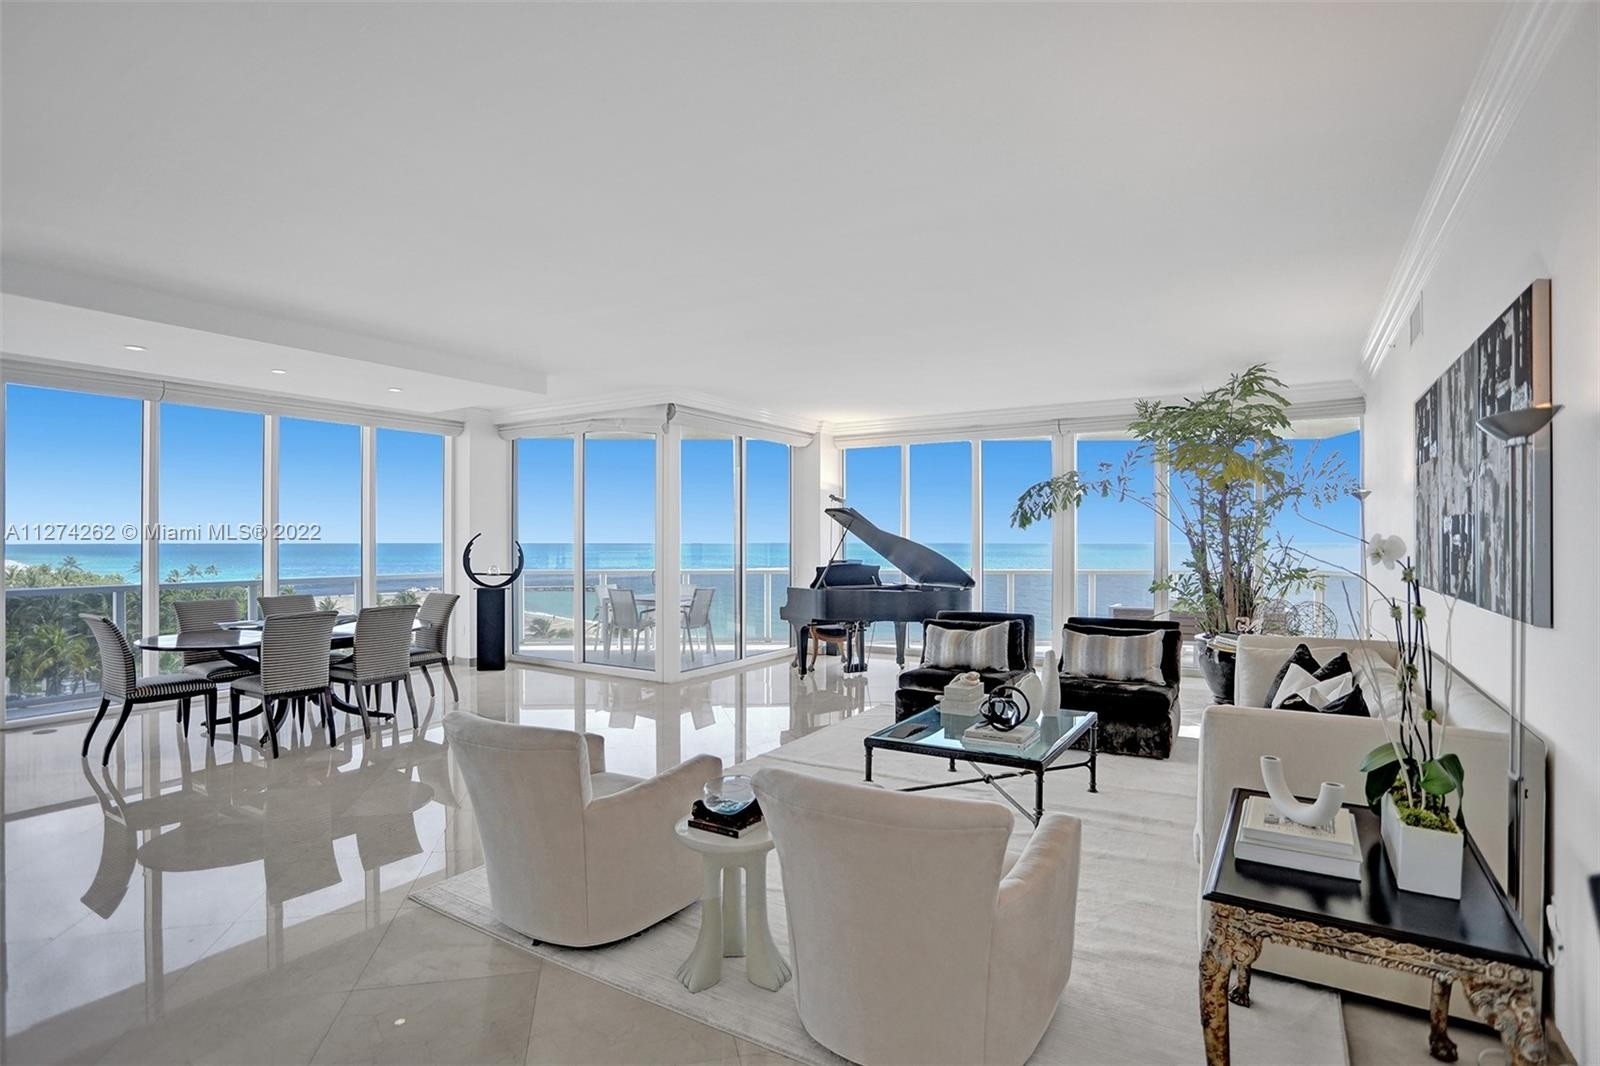 Property at 10225 Collins Ave , 501 Bal Harbour, FL 33154